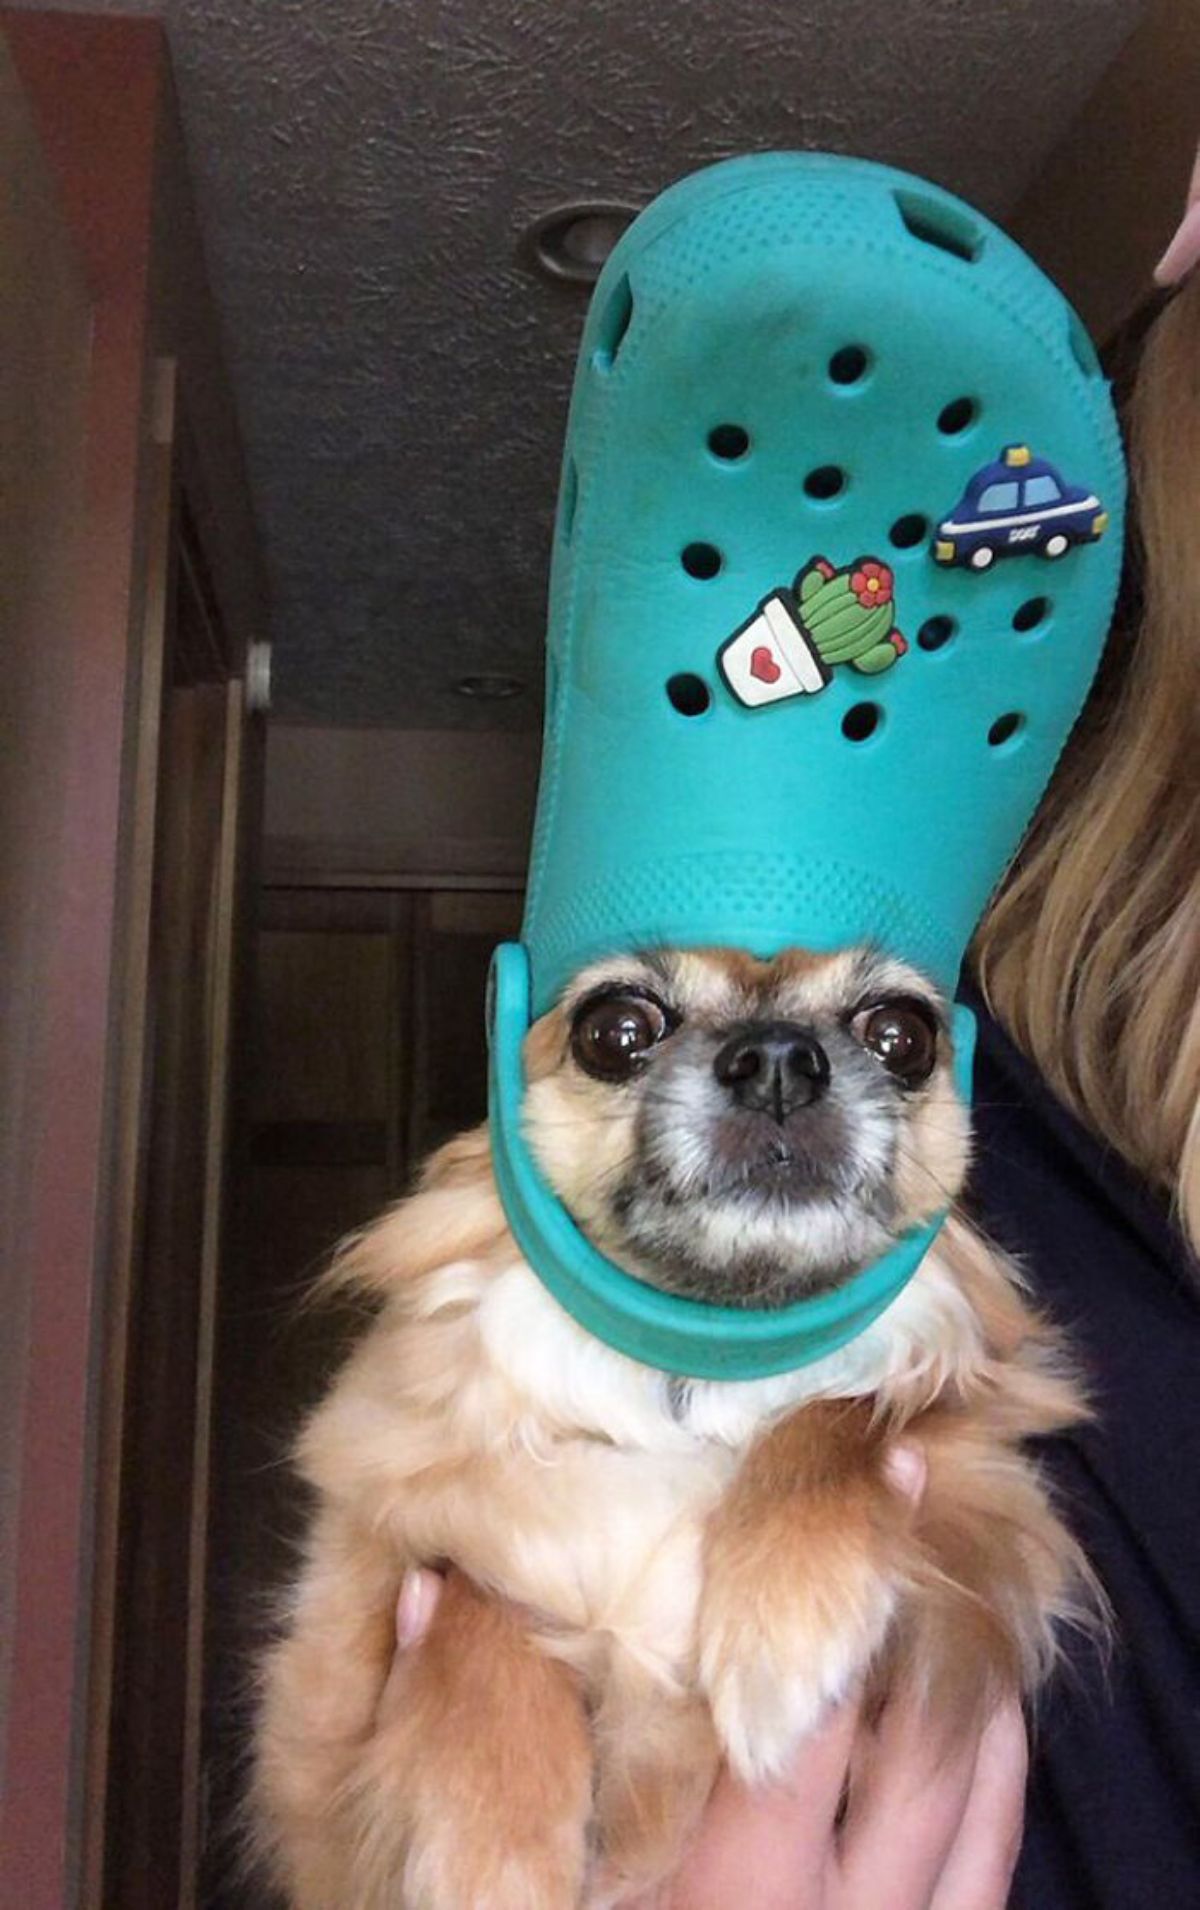 brown and white dog wearing green crocs slipper on the head